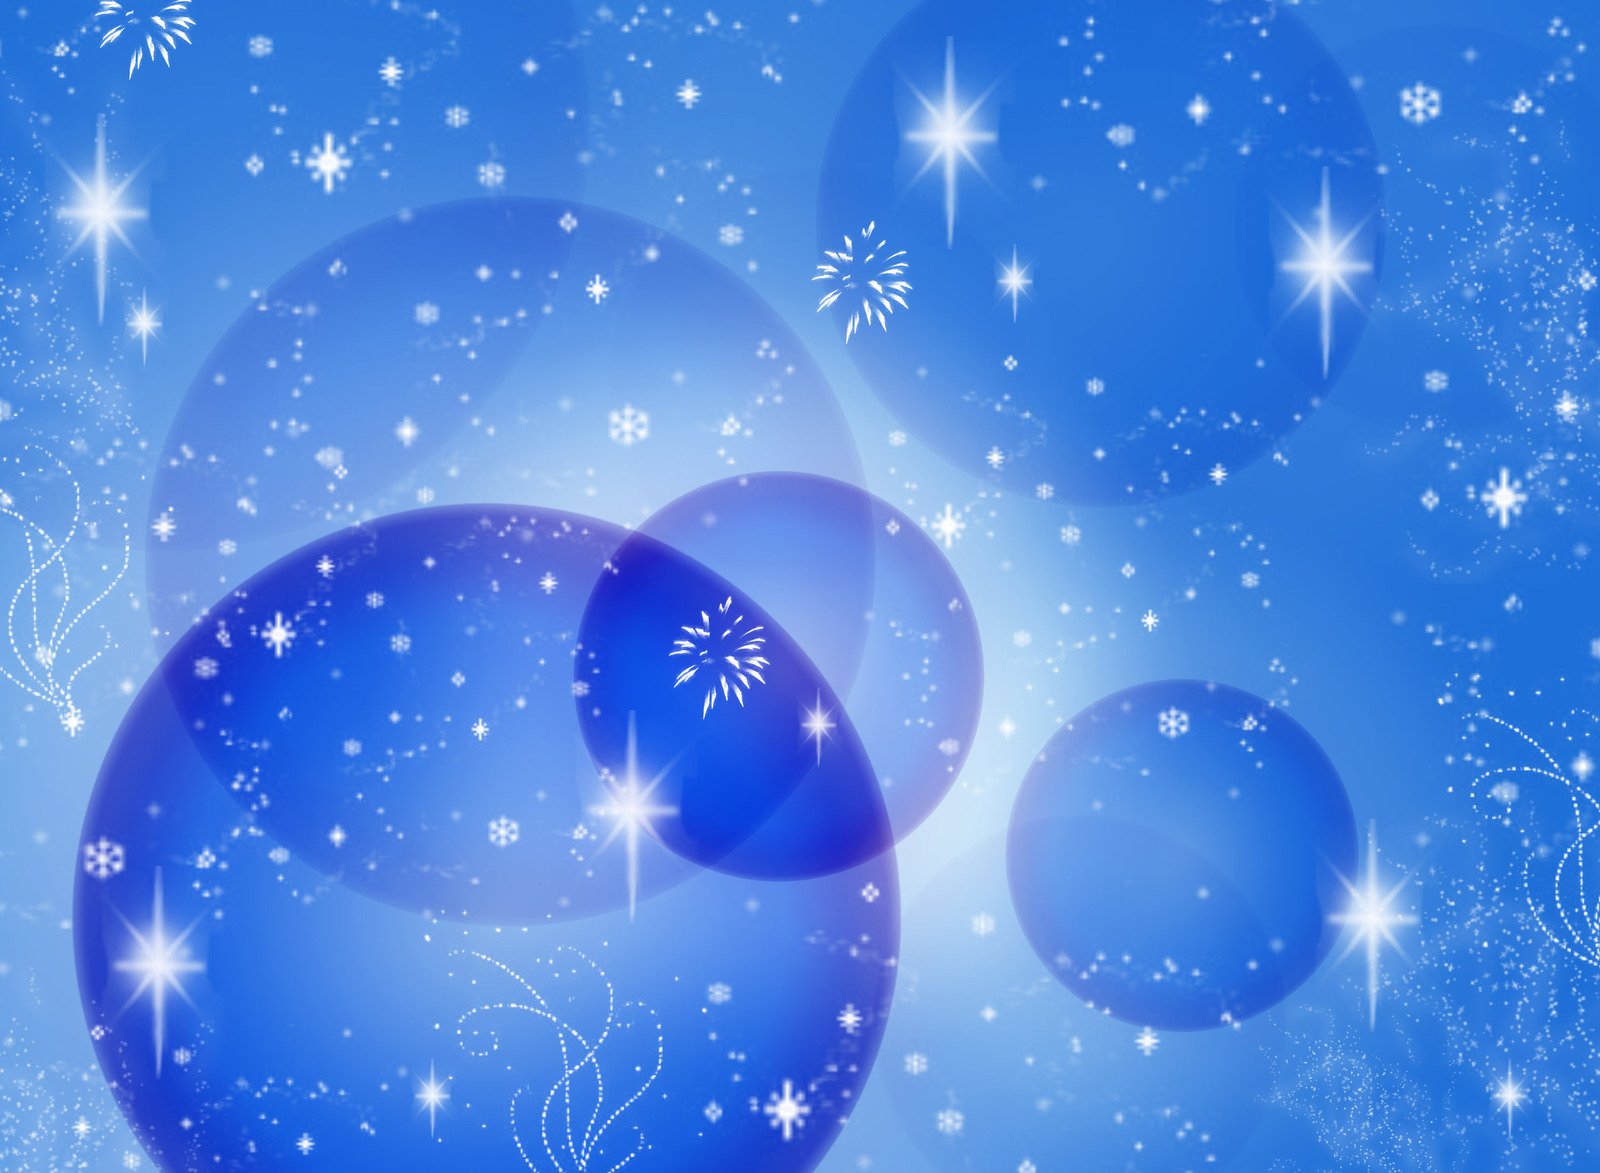 a blue background with snow flakes and balls